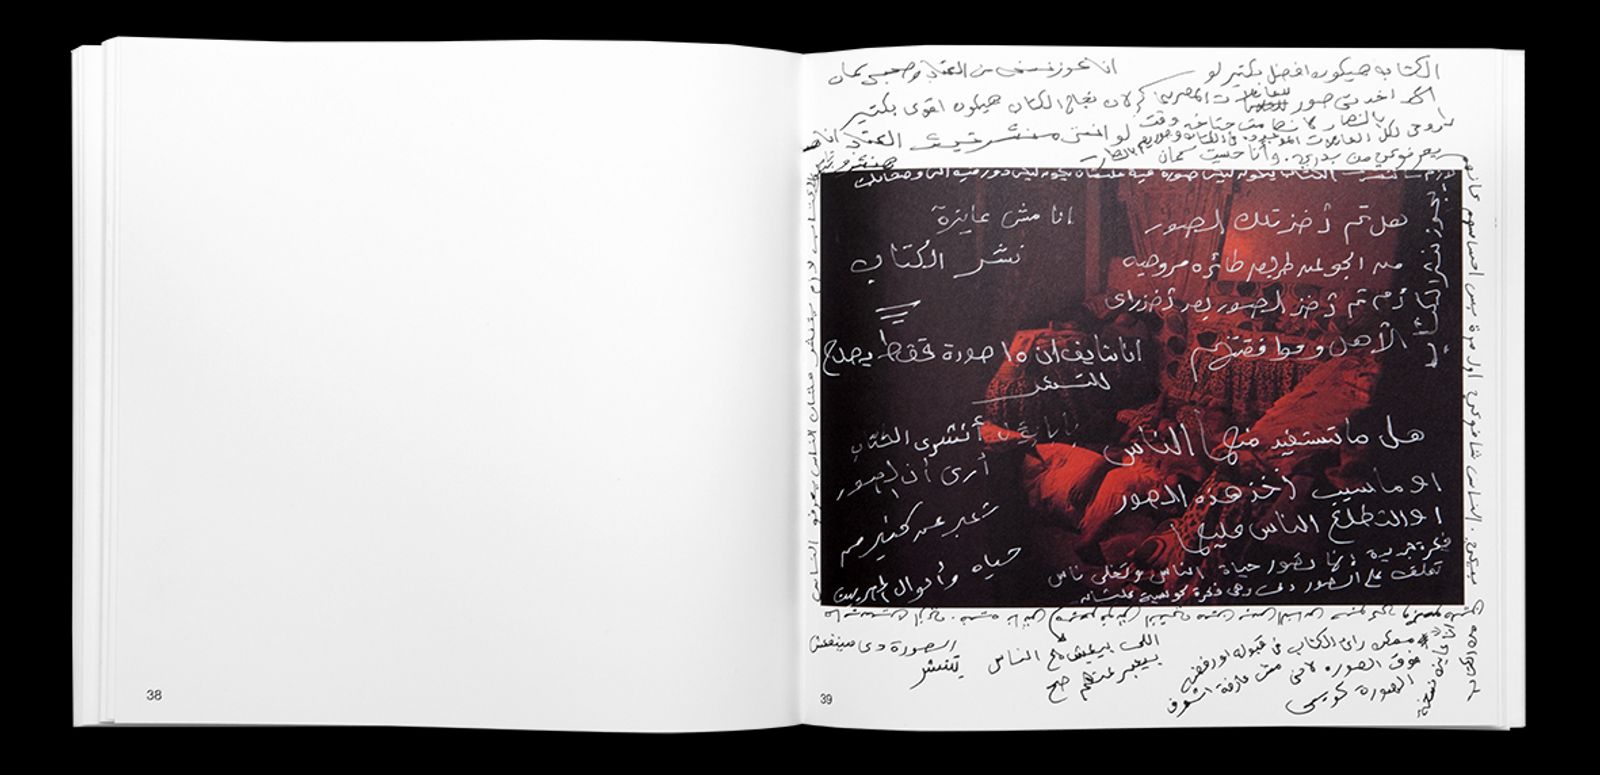 © Bieke Depoorter, spread from the book As it may be